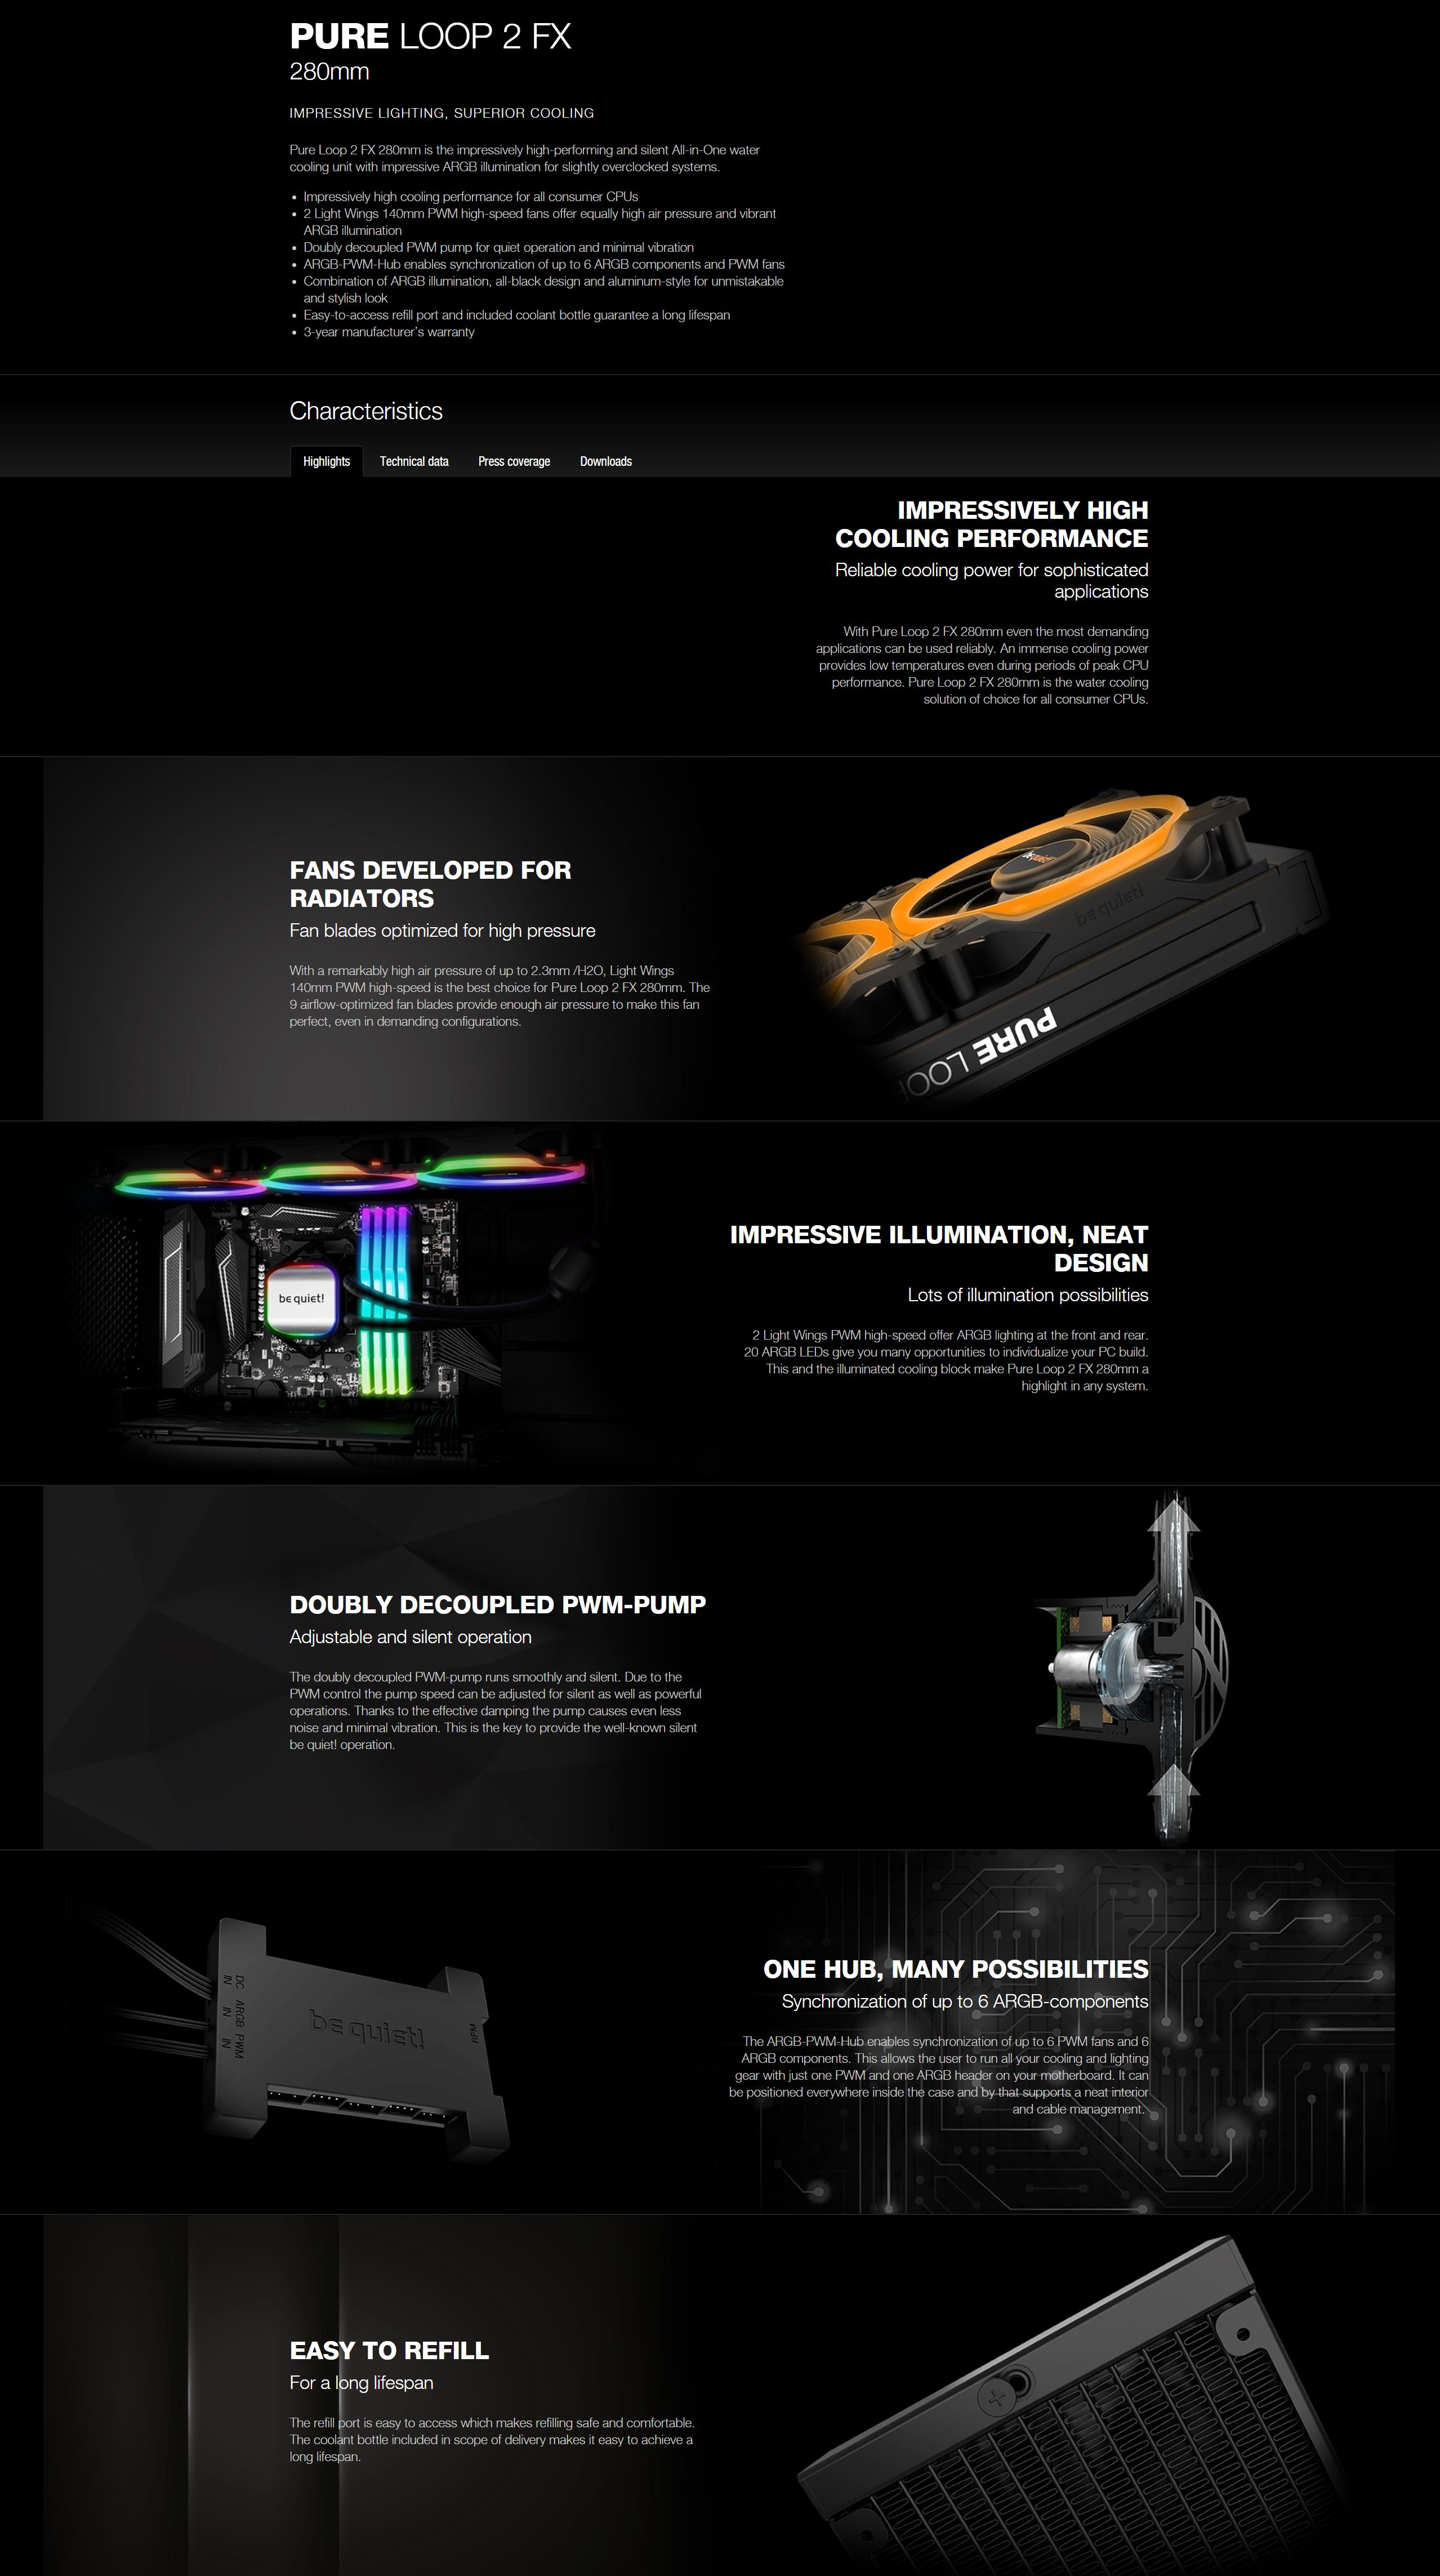 A large marketing image providing additional information about the product be quiet! Pure Loop 2 FX 280mm AIO CPU Cooler - Additional alt info not provided